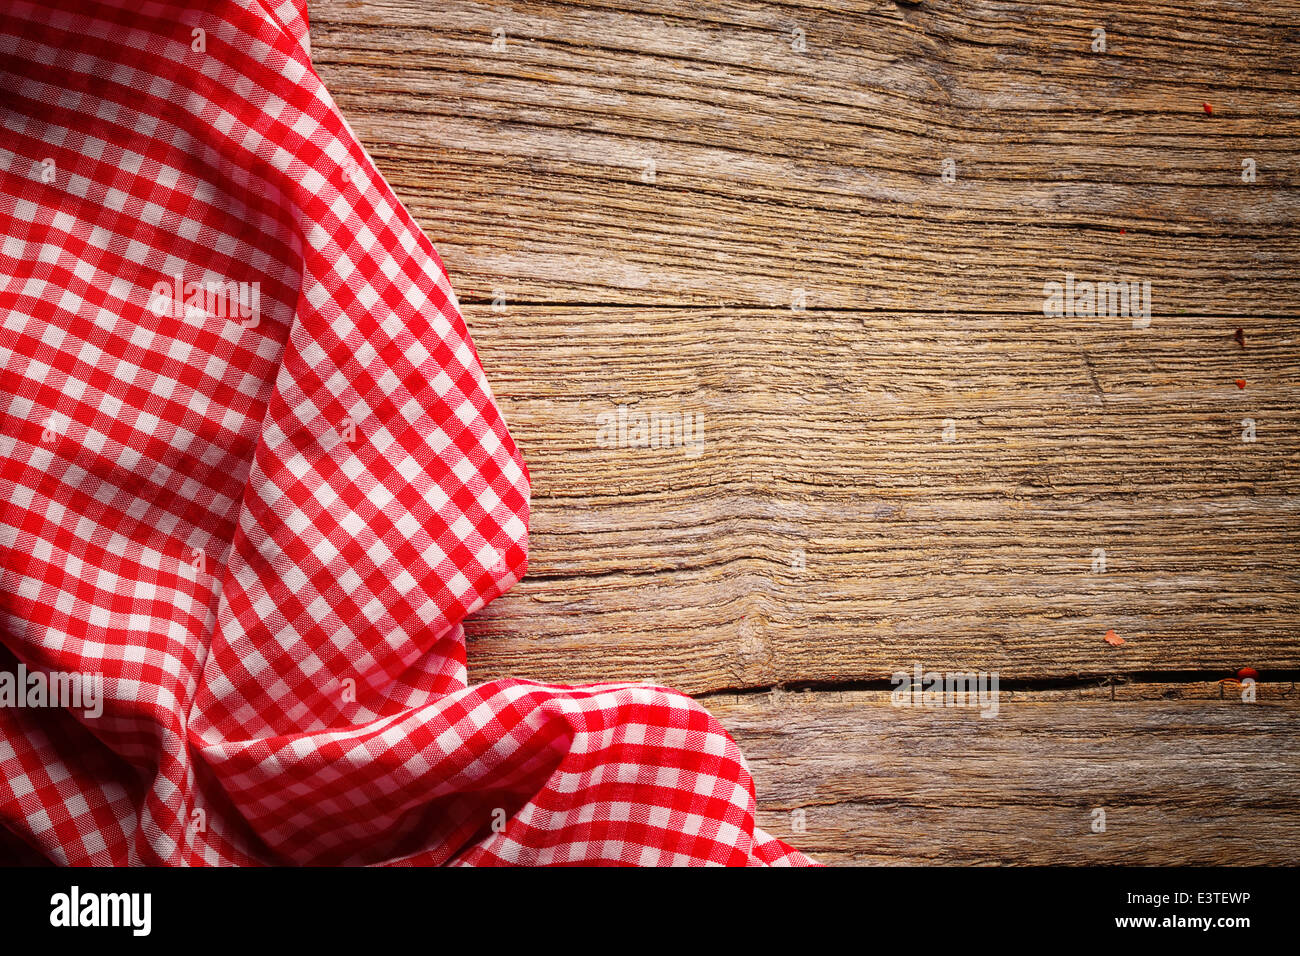 Checkered tablecloth on wooden table Stock Photo